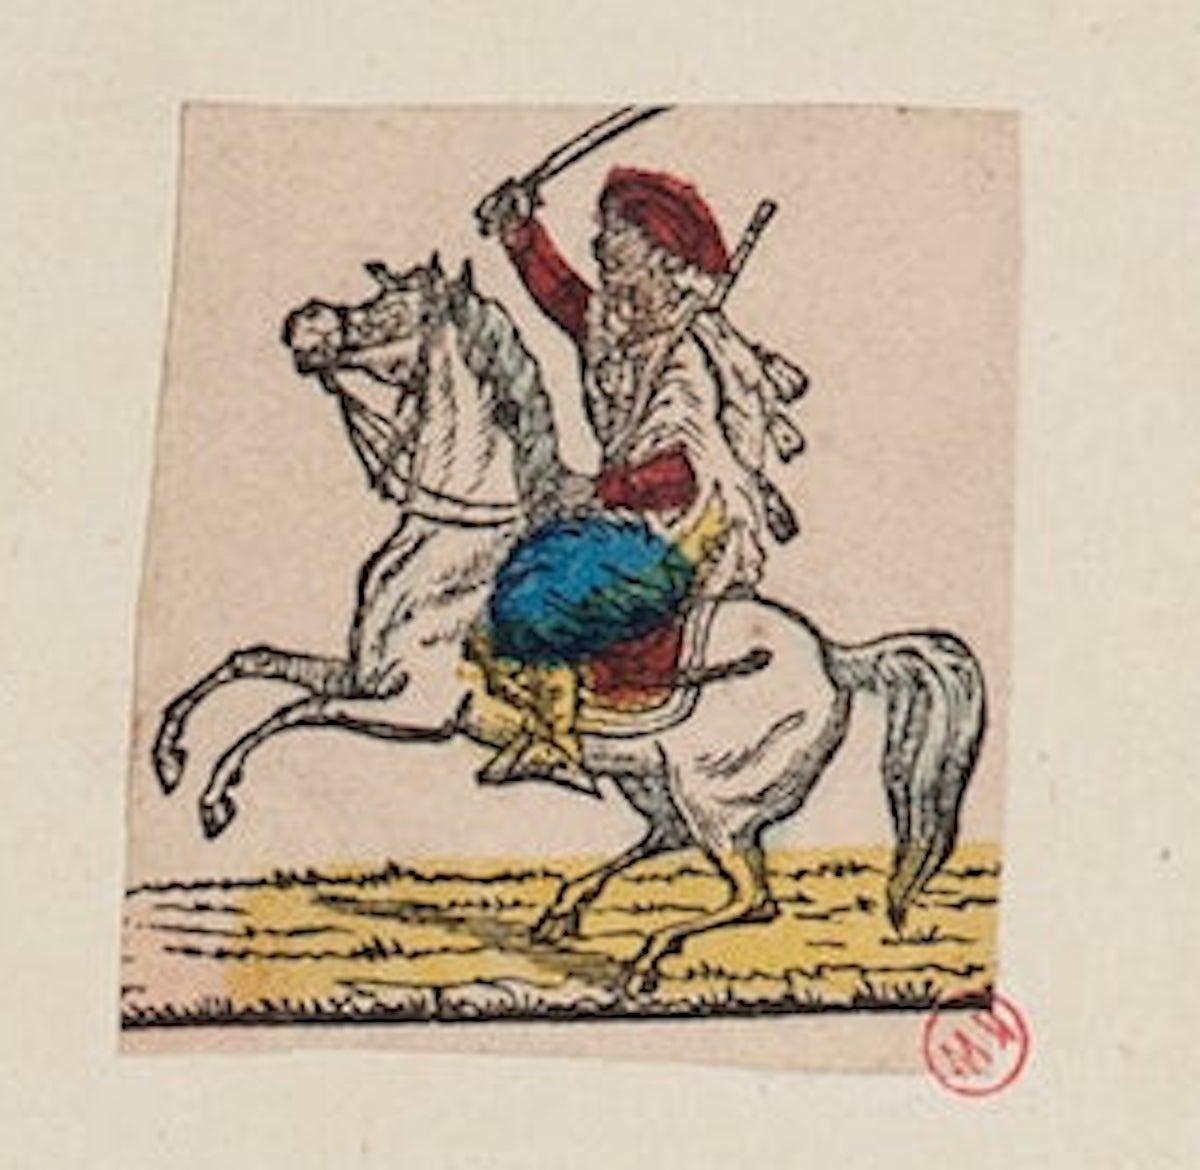 Arab Knight  - Original Hand-color Etching on Paper - 18th Century